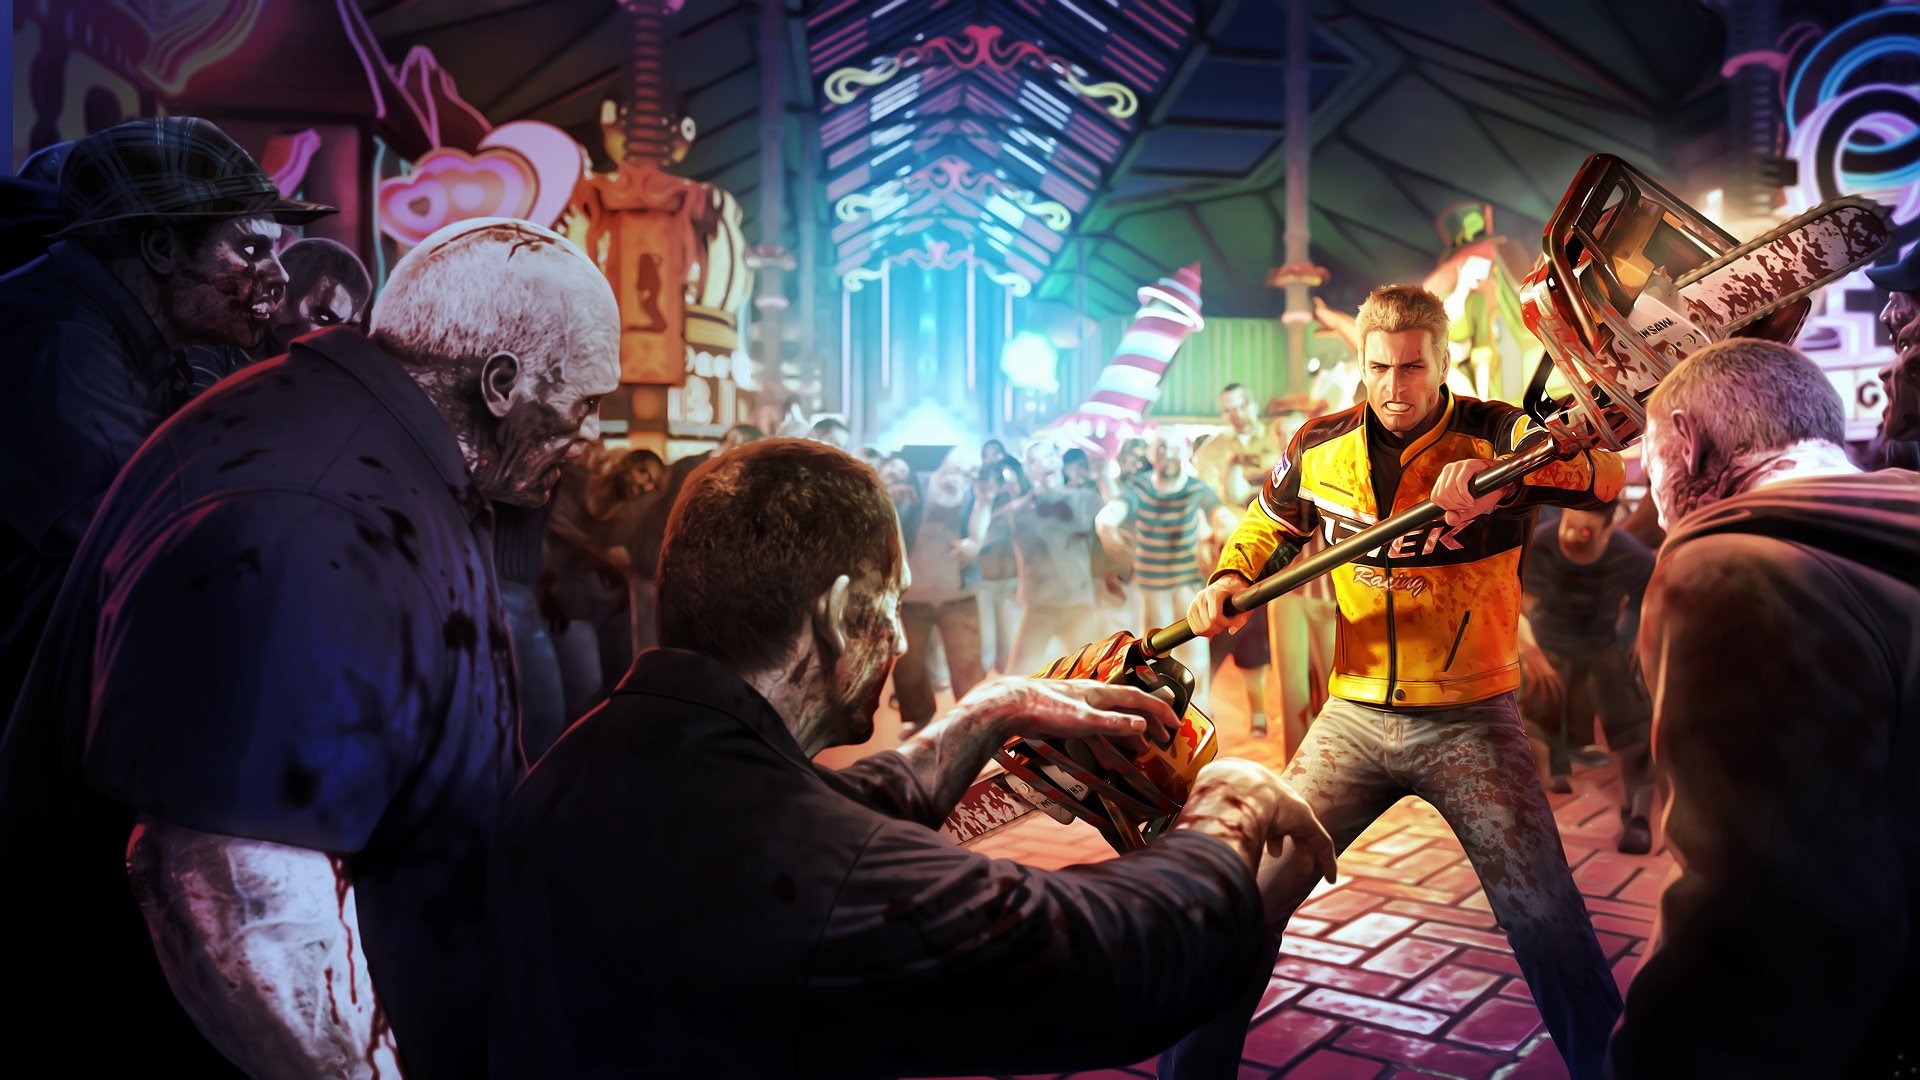 Dead Rising 5 leaks reveal cancelled game with Dead Rising 2 character